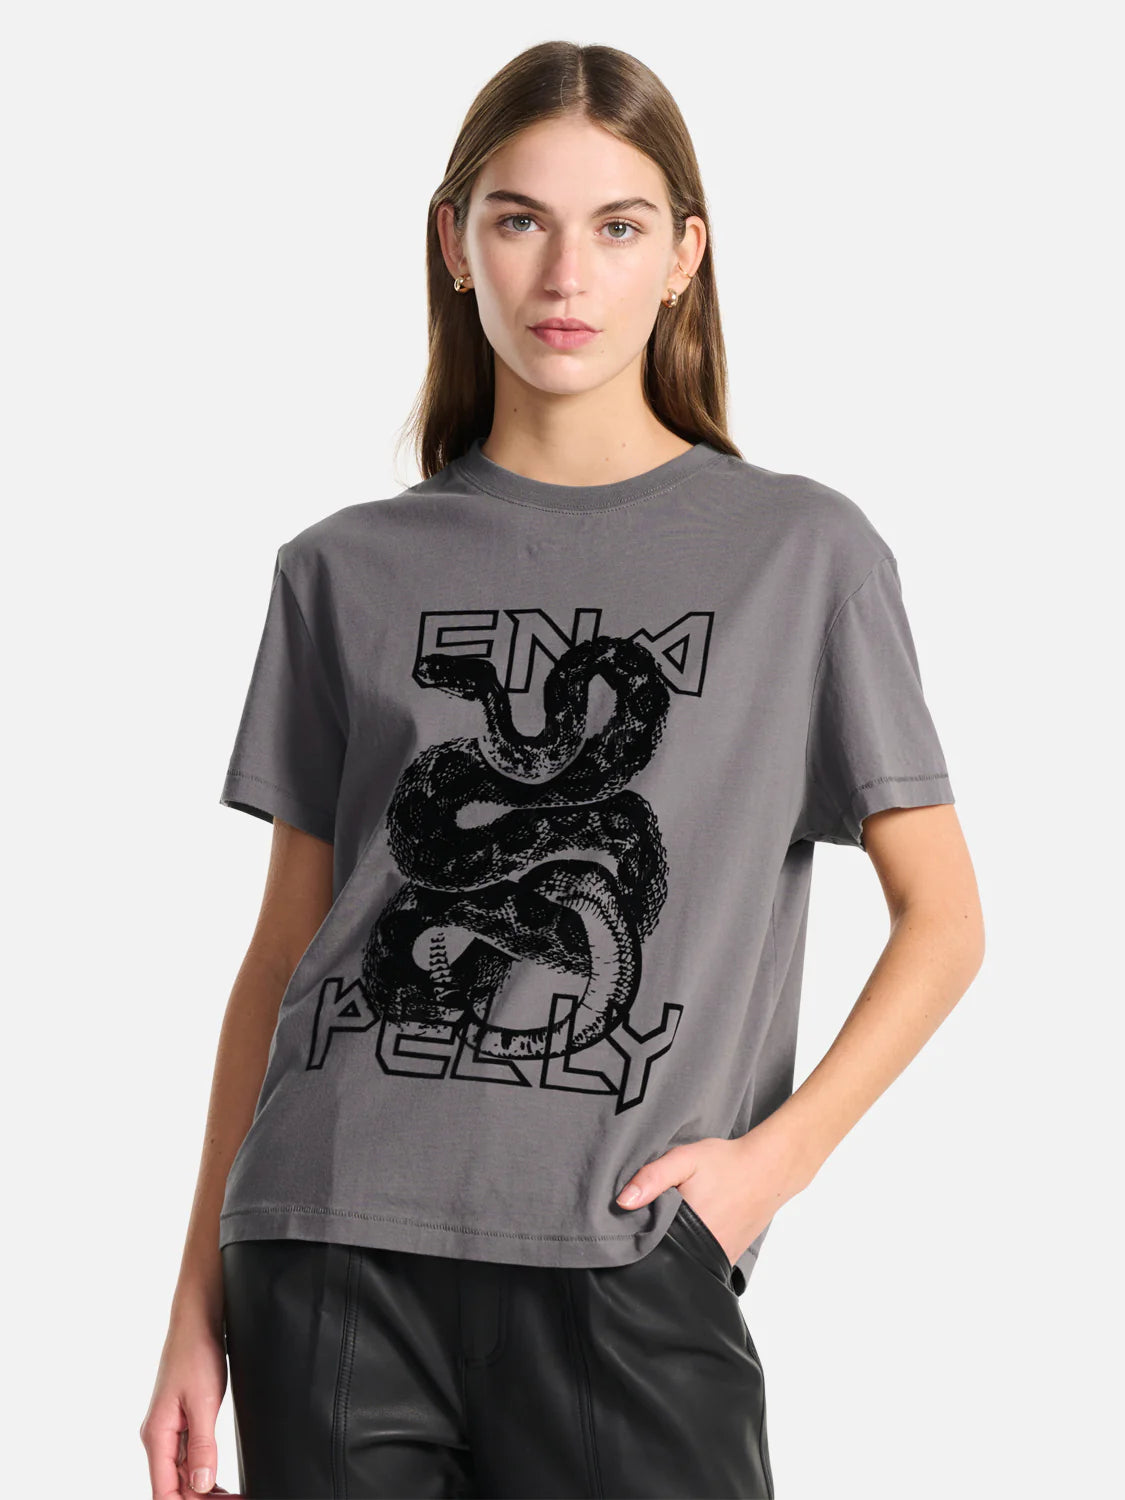 ENA PELLY Flocked Python Relaxed Tee